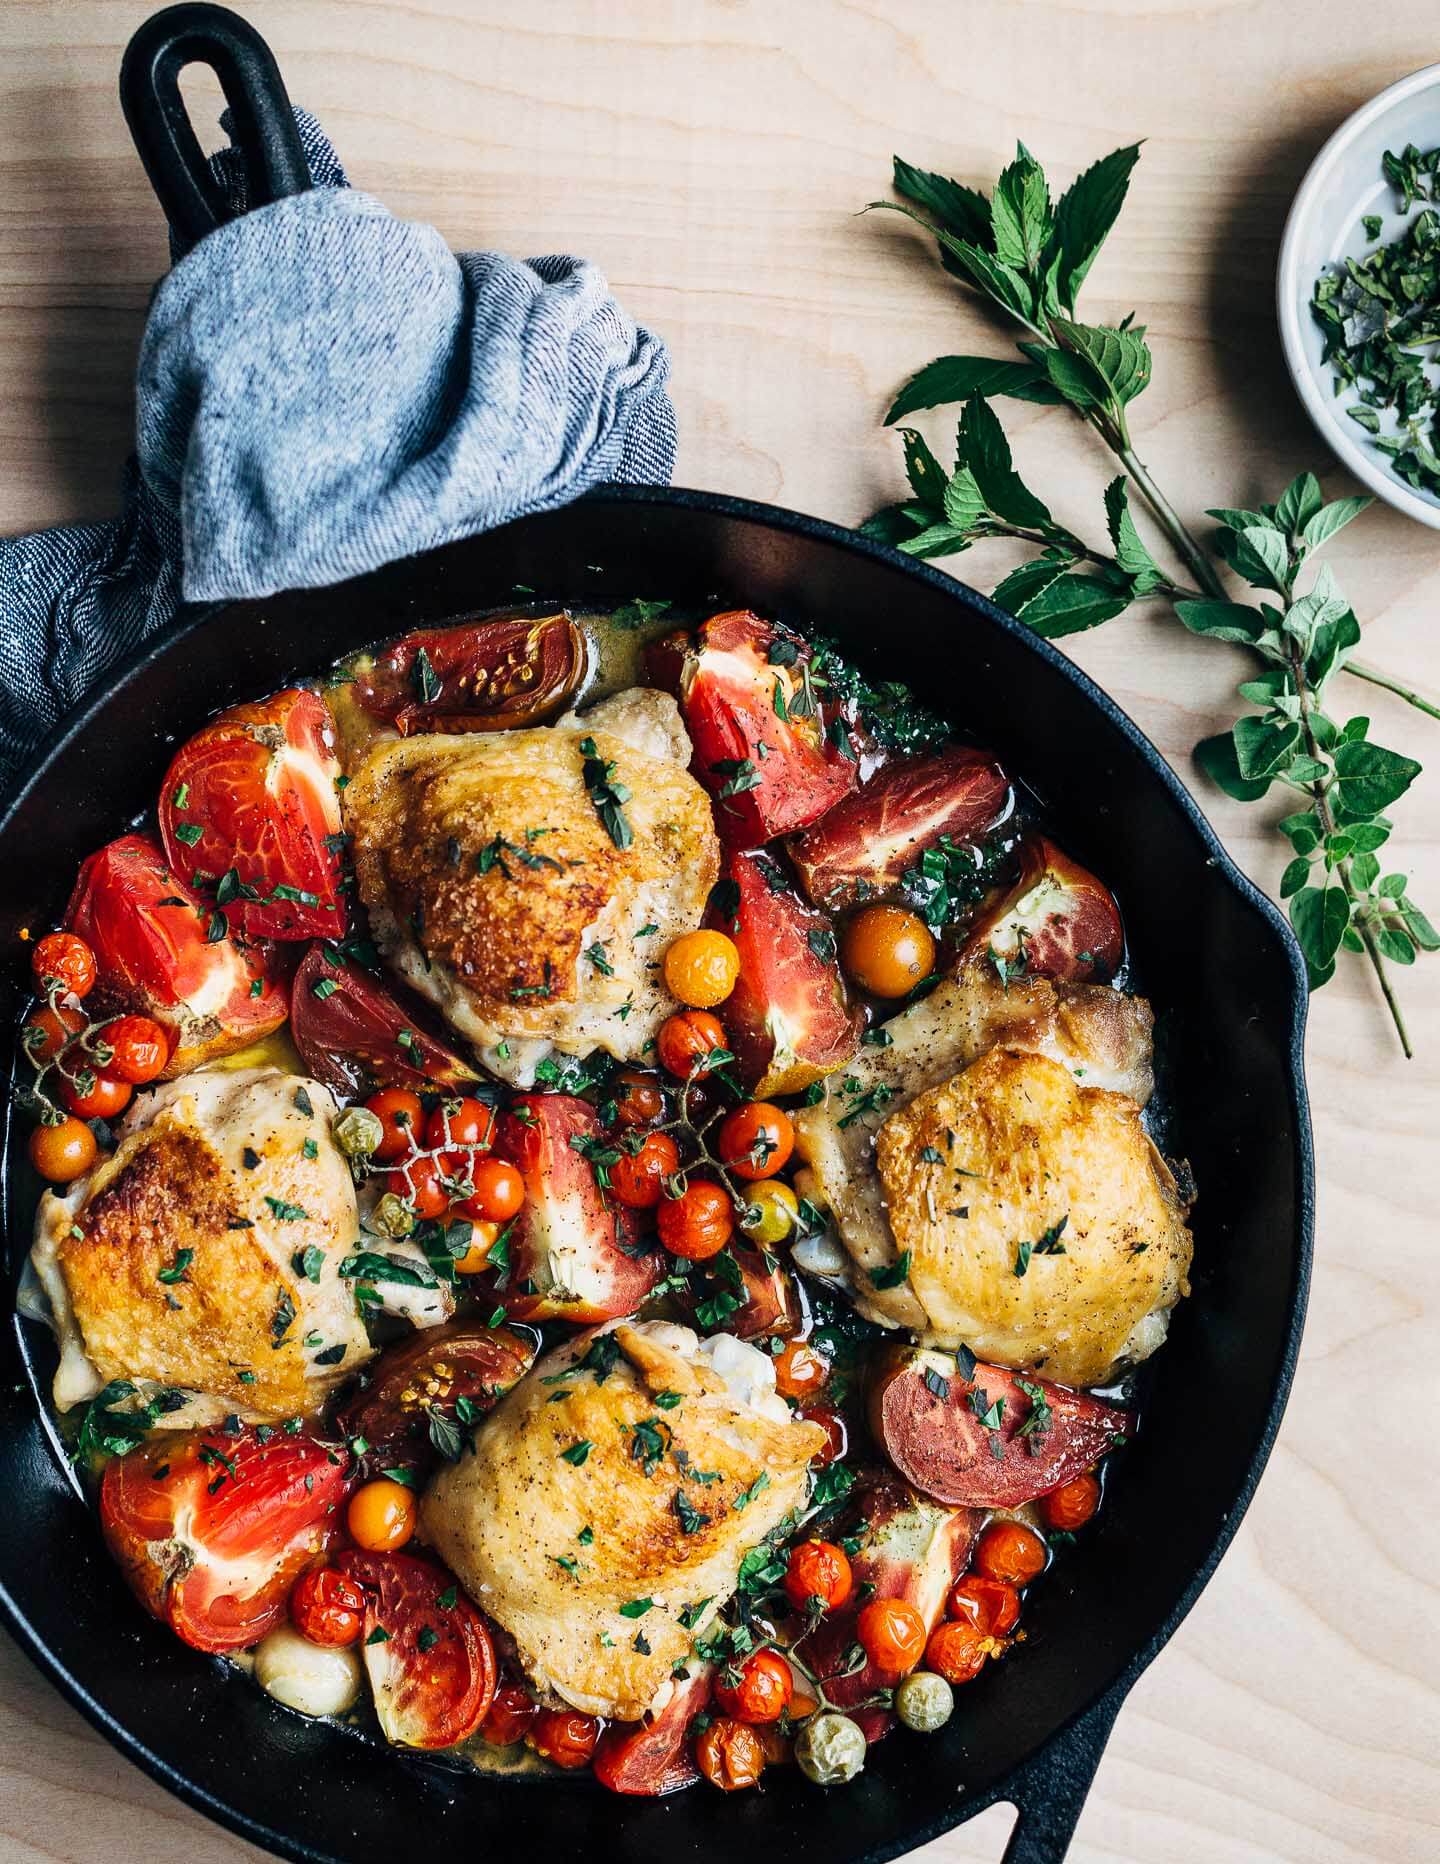 Cast iron skillet baked chicken with tomatoes, garlic, and herbs. Chicken thighs are seared until crispy and golden, and then baked up with tomatoes and garlic. 